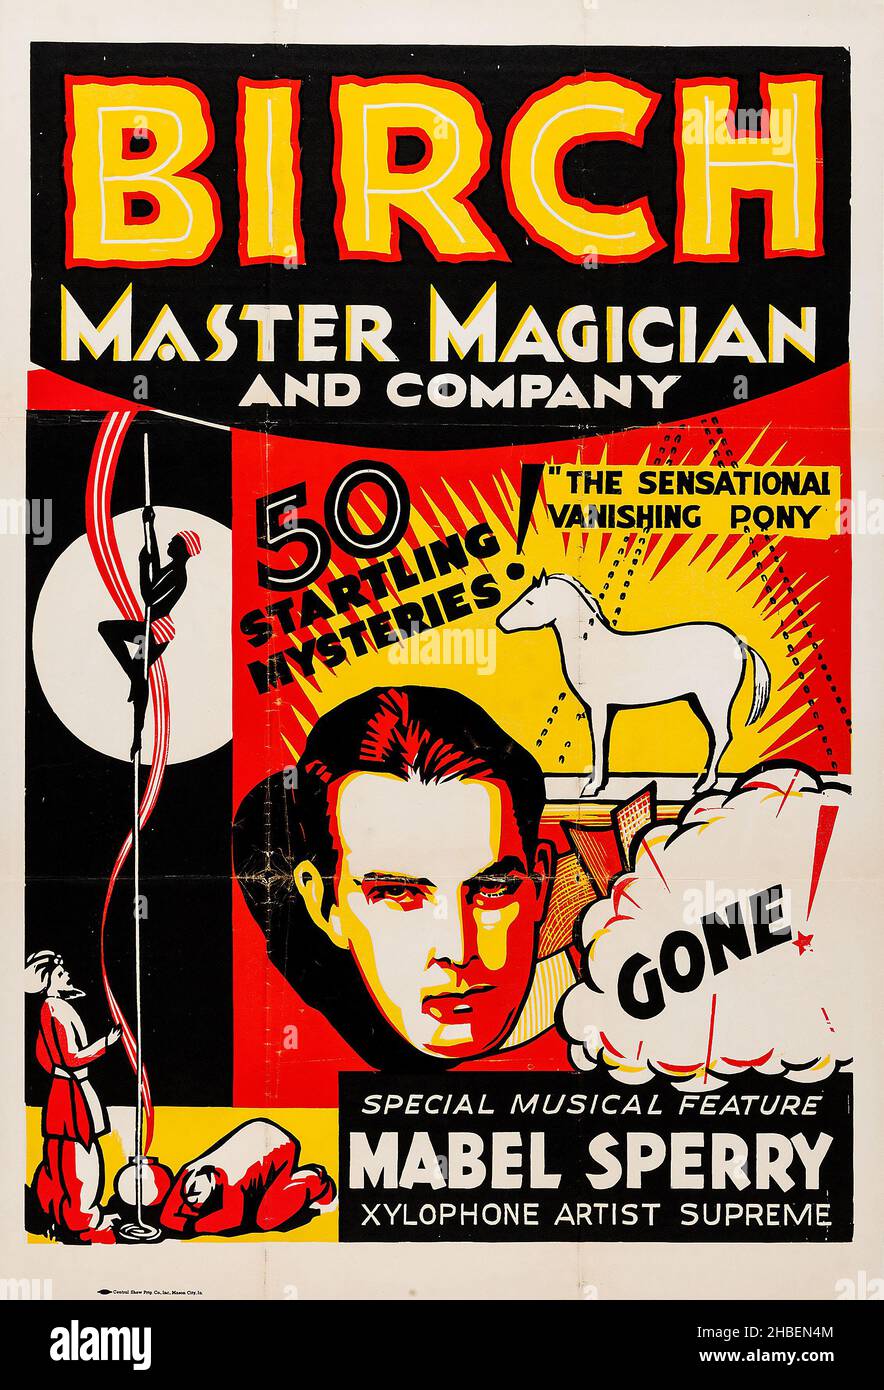 MacDonald Birch Magic Poster (Central Show Printing Co. Inc., 1930s). Poster - Master Magician and Company - 50 startling mysteries! Vanishing pony. Stock Photo